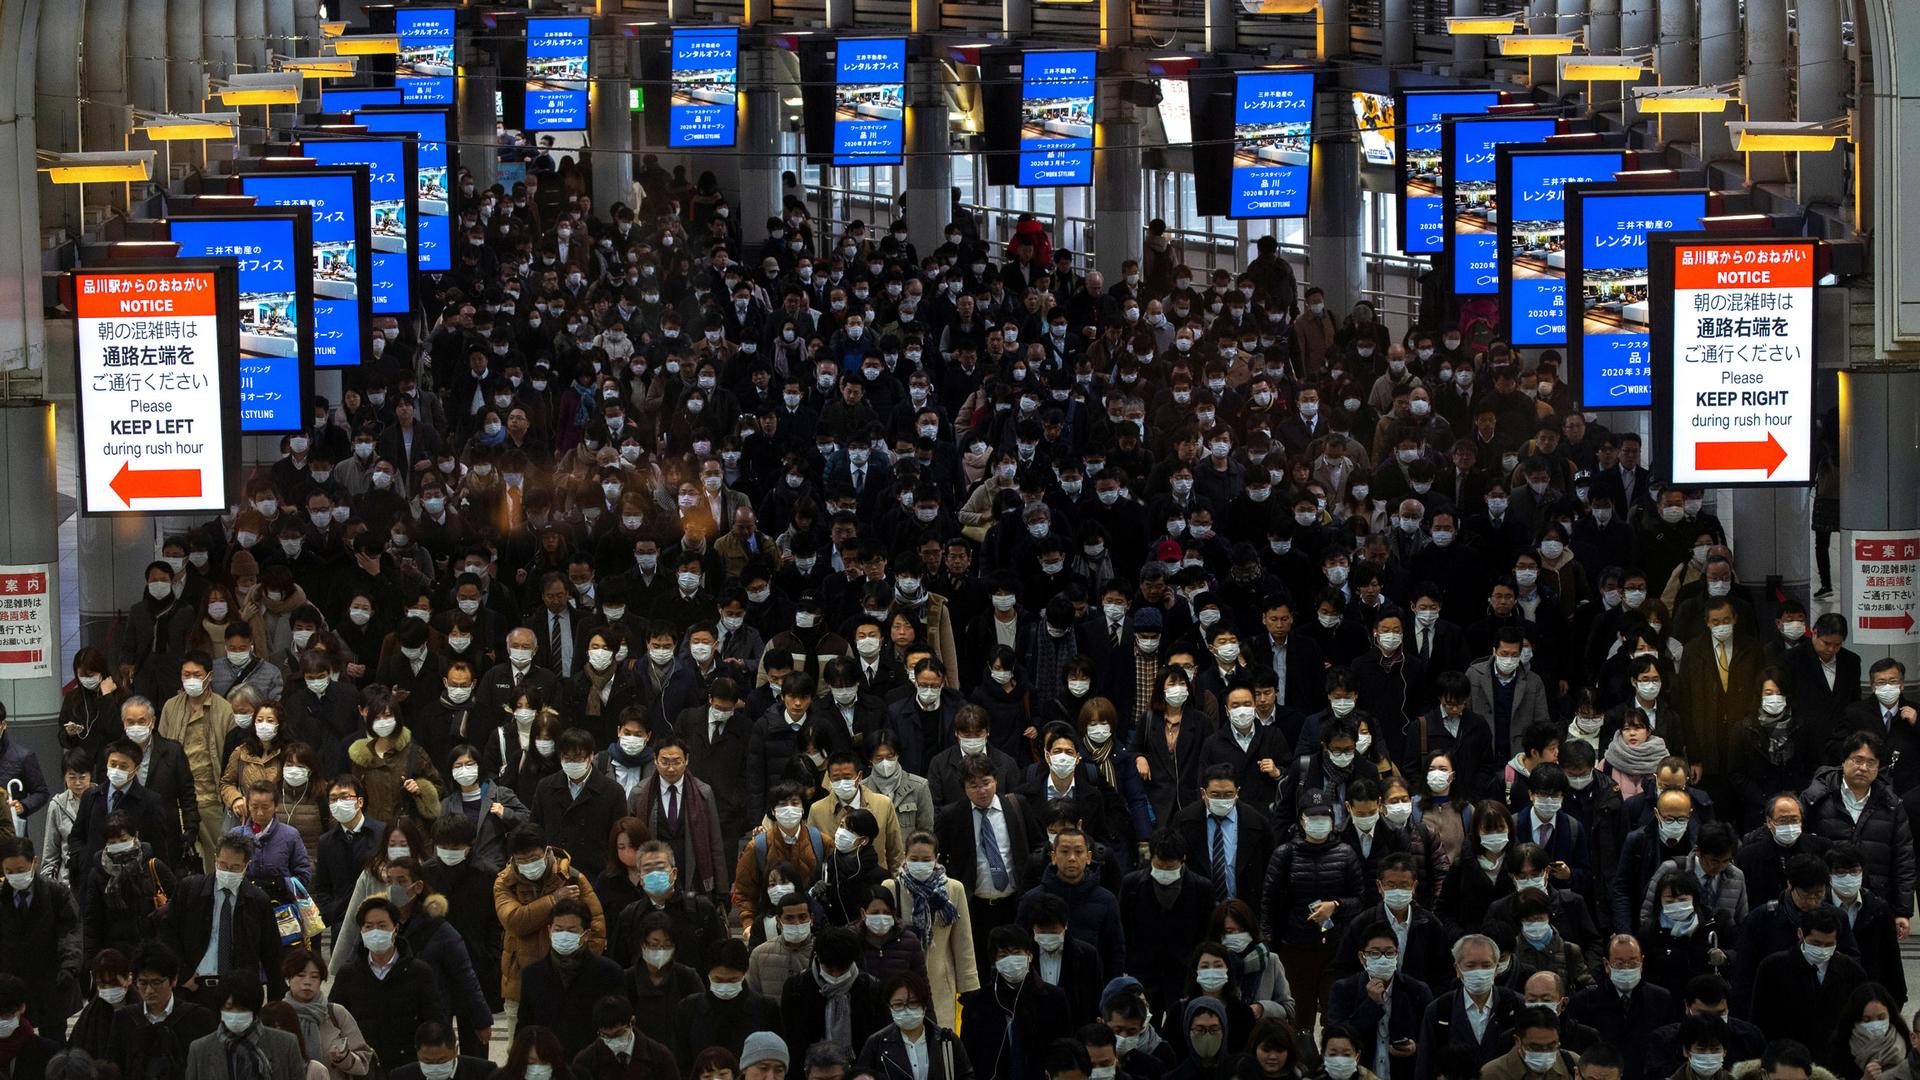 A large open area of a train staton is shown crowded with people most of which are wearing protective face masks.